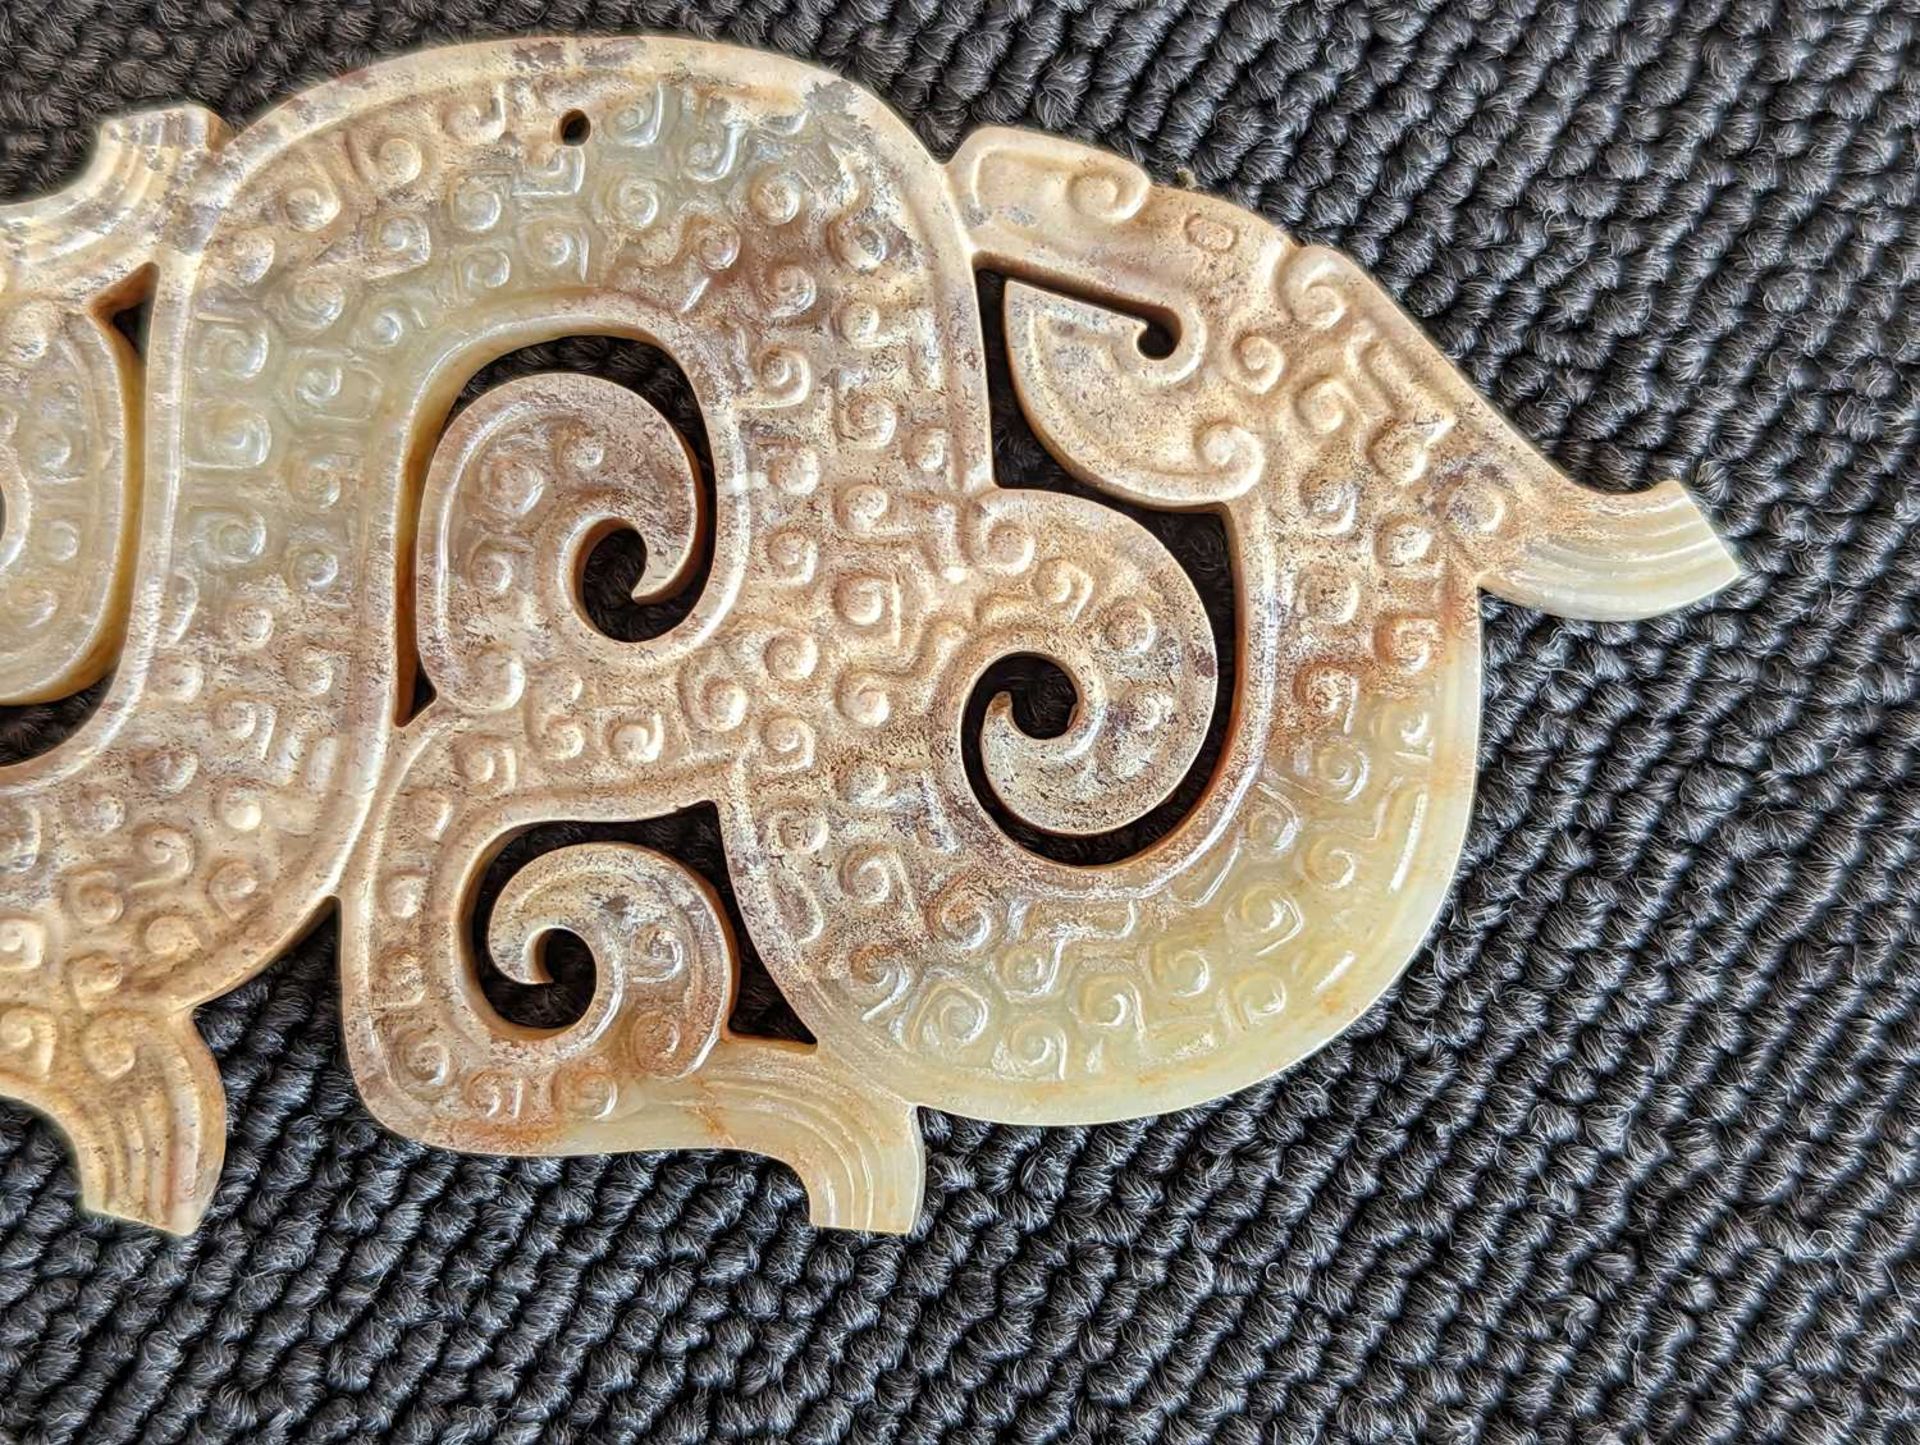 DRAGON-SHAPED PENDANT WITH CIRRUS CLOUD STRIPES - Image 17 of 27